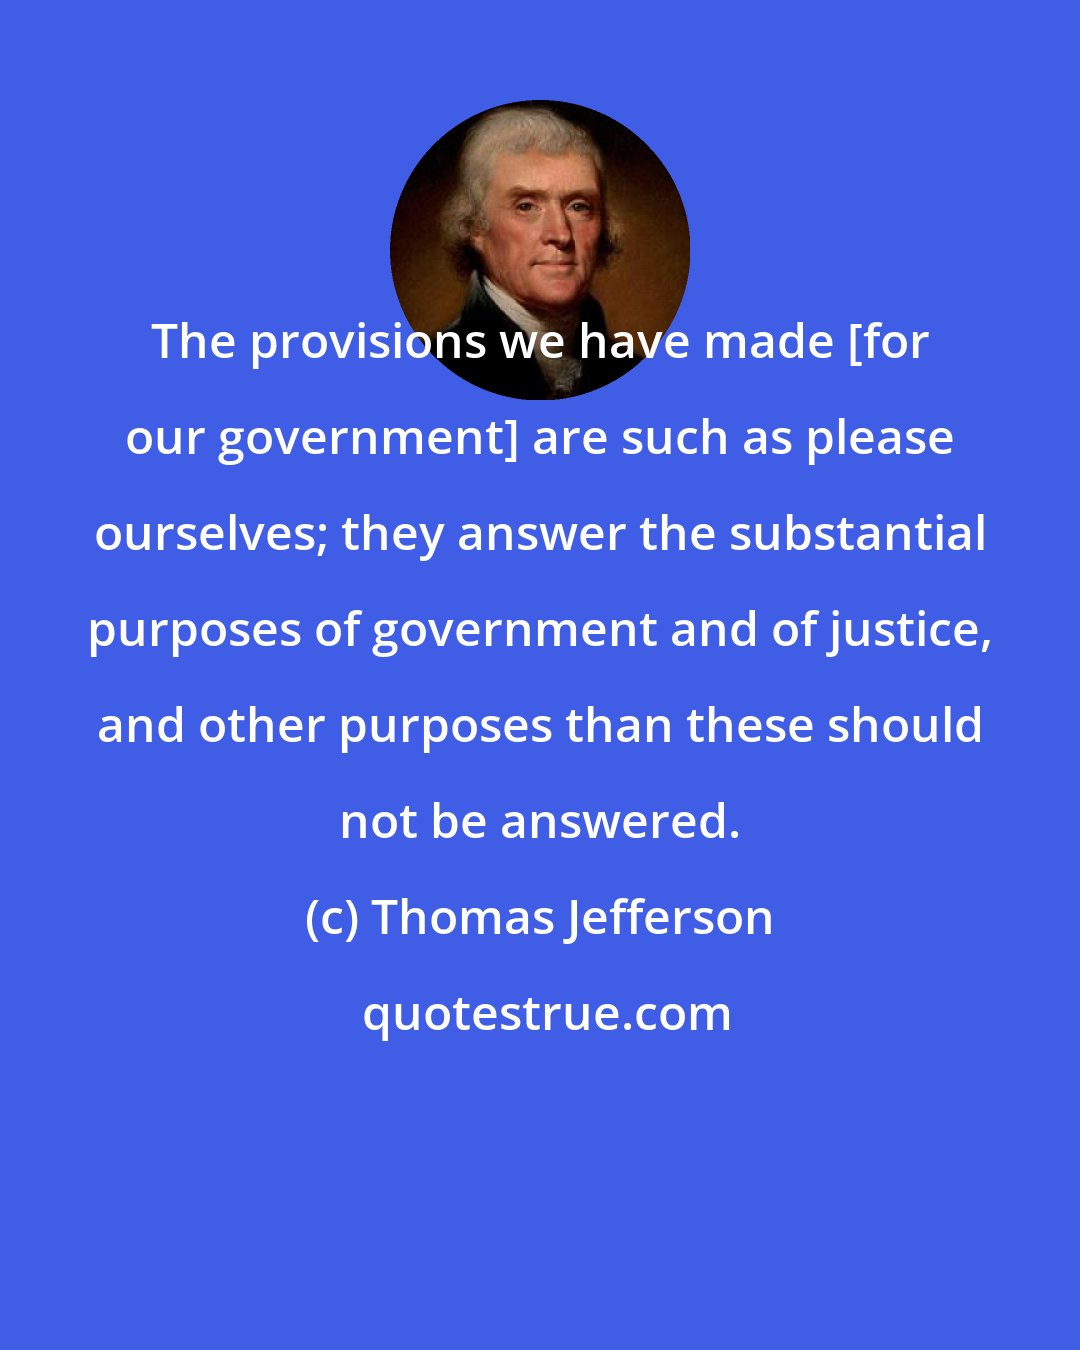 Thomas Jefferson: The provisions we have made [for our government] are such as please ourselves; they answer the substantial purposes of government and of justice, and other purposes than these should not be answered.